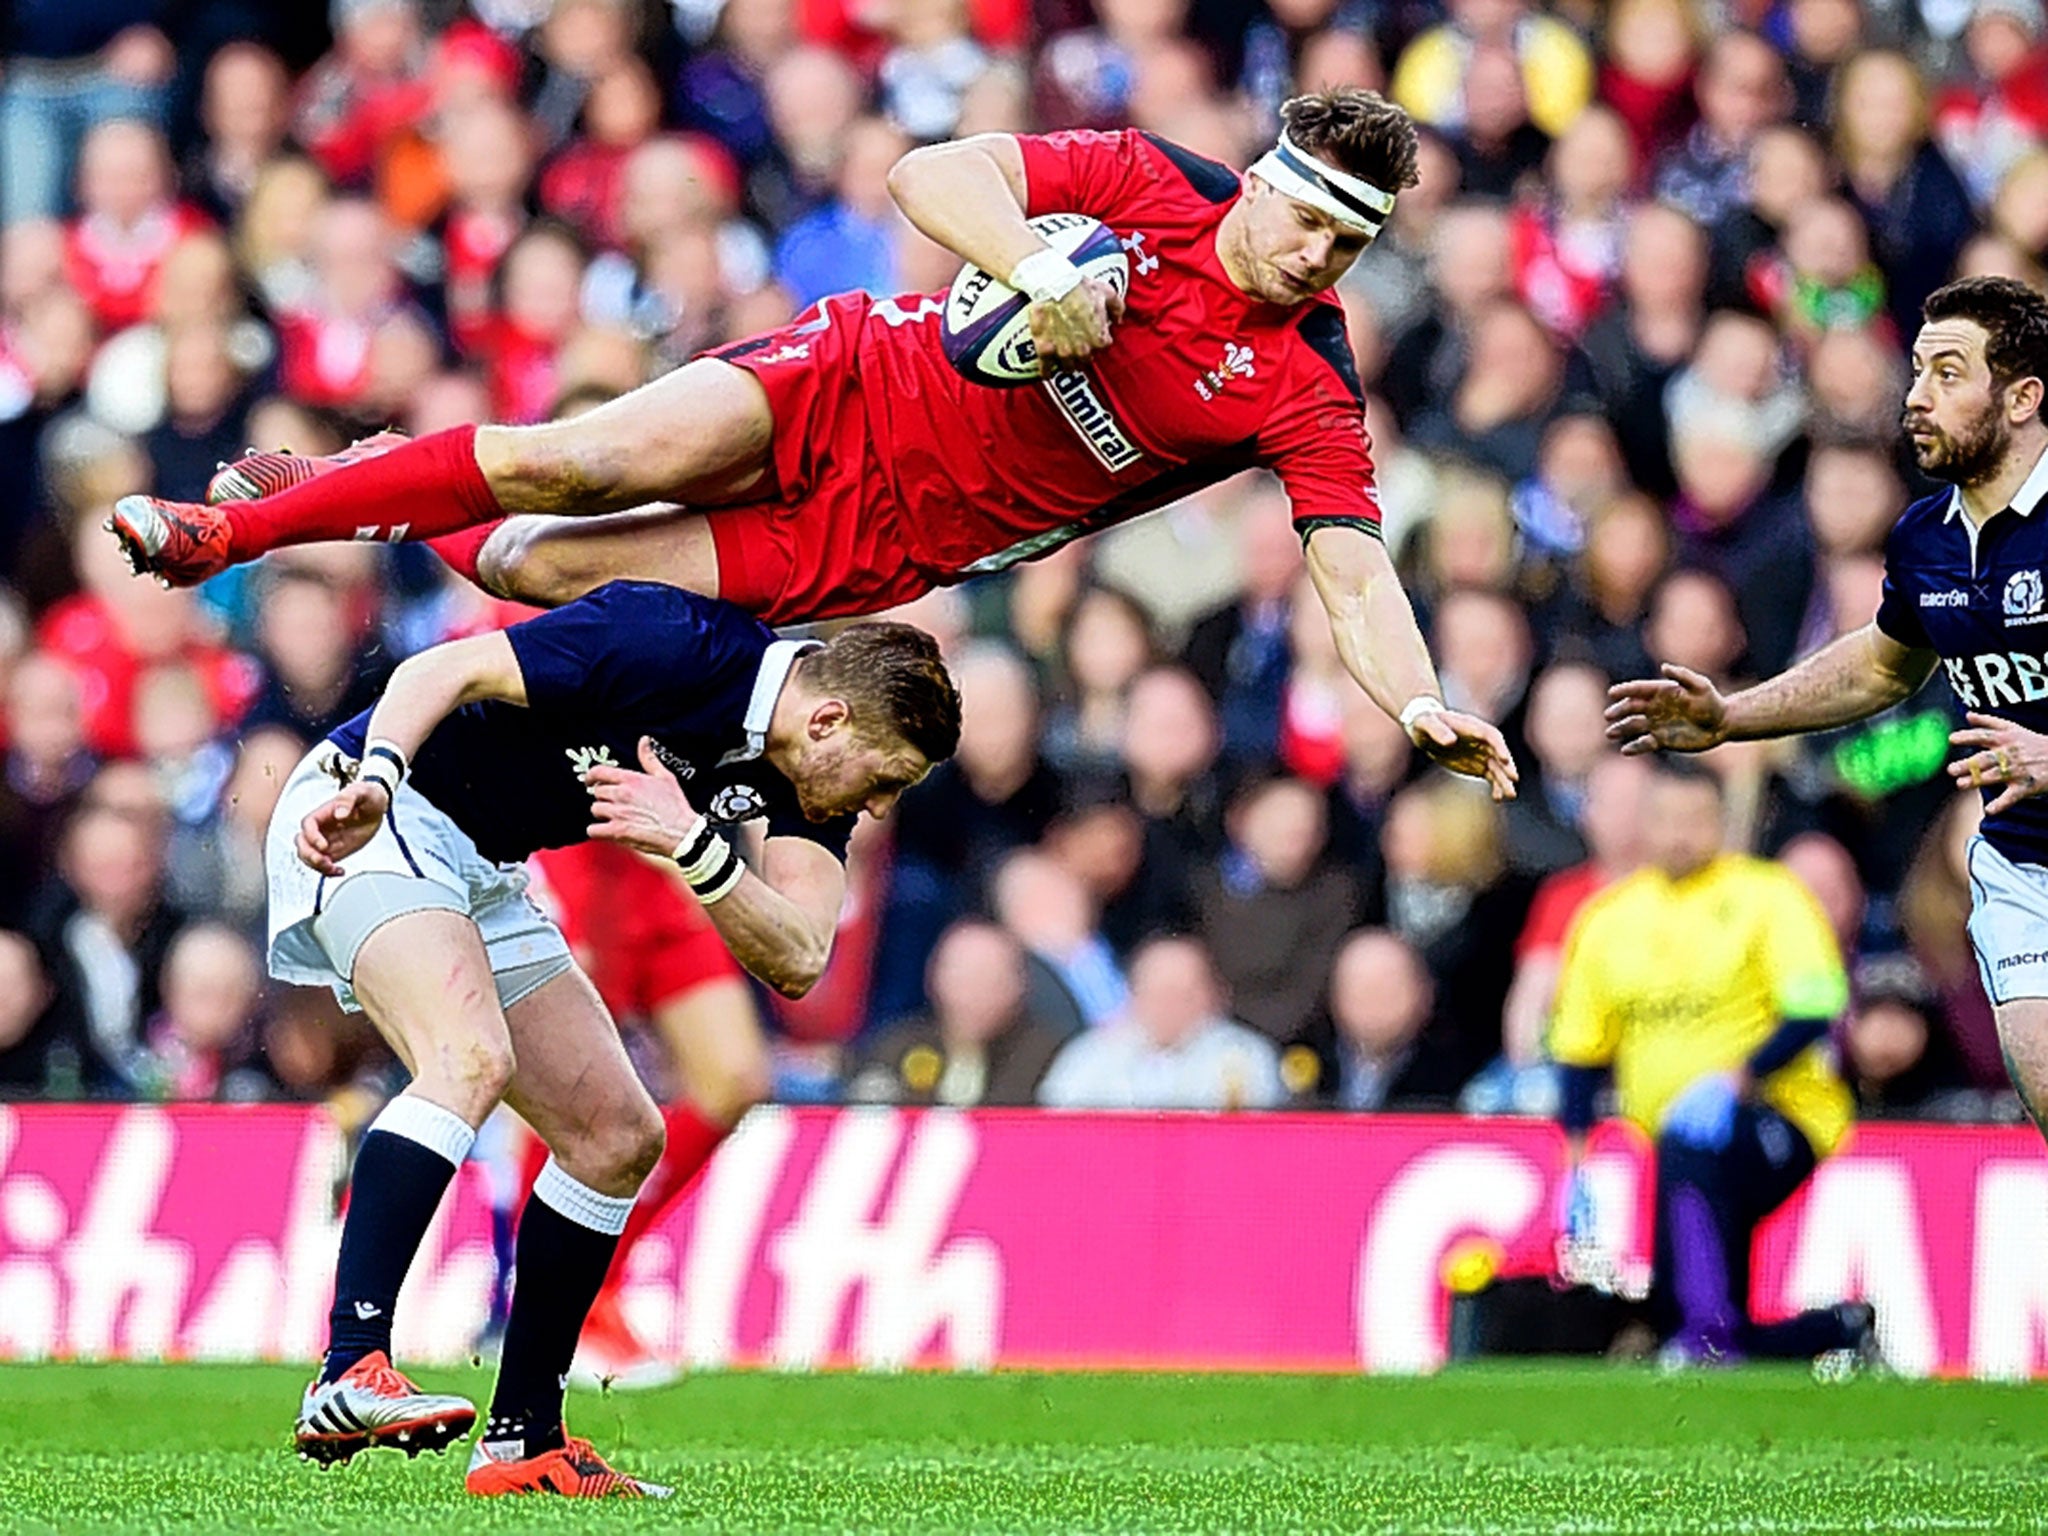 Scotland fly-half Finn Russell takes out his Welsh opposite number, Dan Biggar, during Sunday’s game at Murrayfield